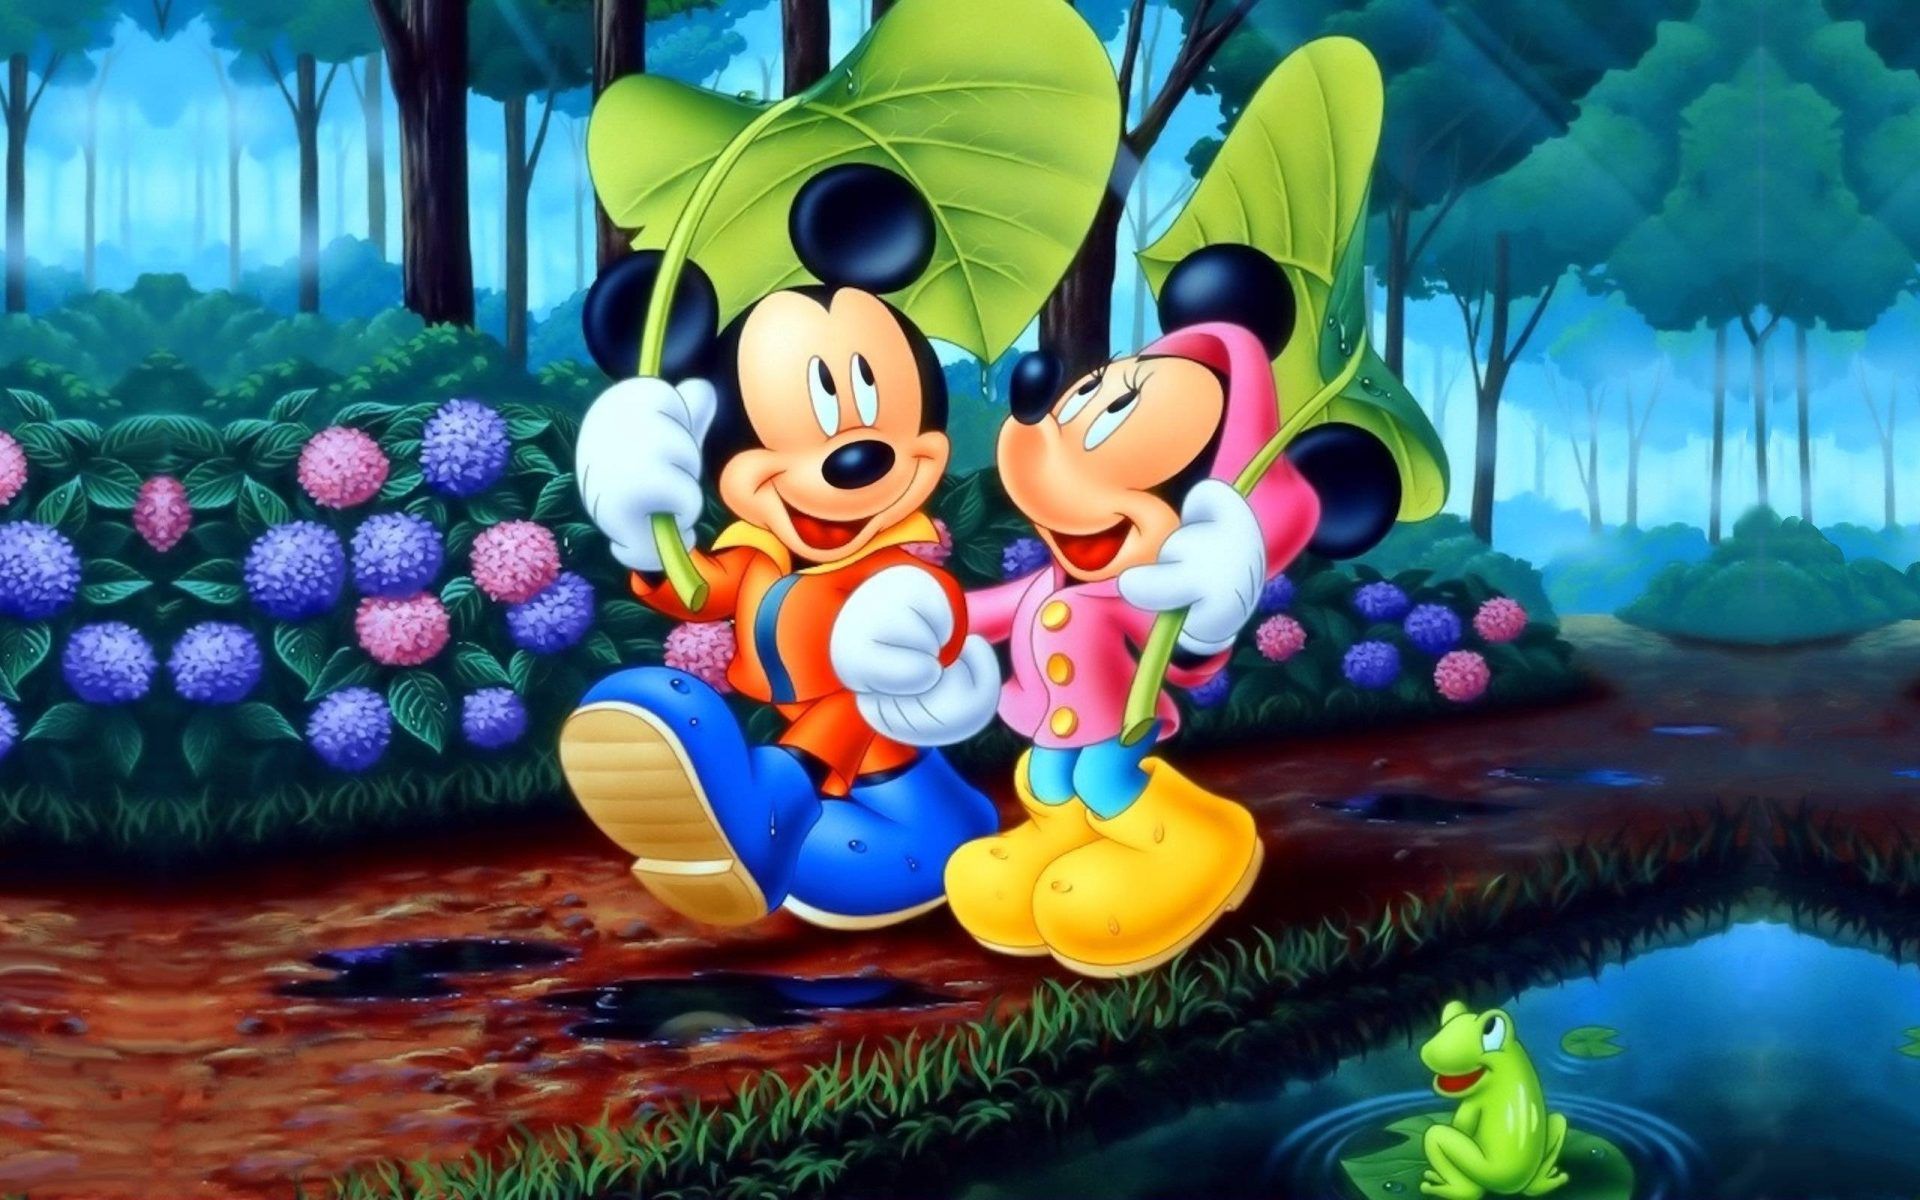 Mickey And Minnie Mouse Romantic Walk In The Park Love Couple Desktop HD Wallpaper For Mobile Phones Tablet And PC 2560x1600, Wallpaper13.com